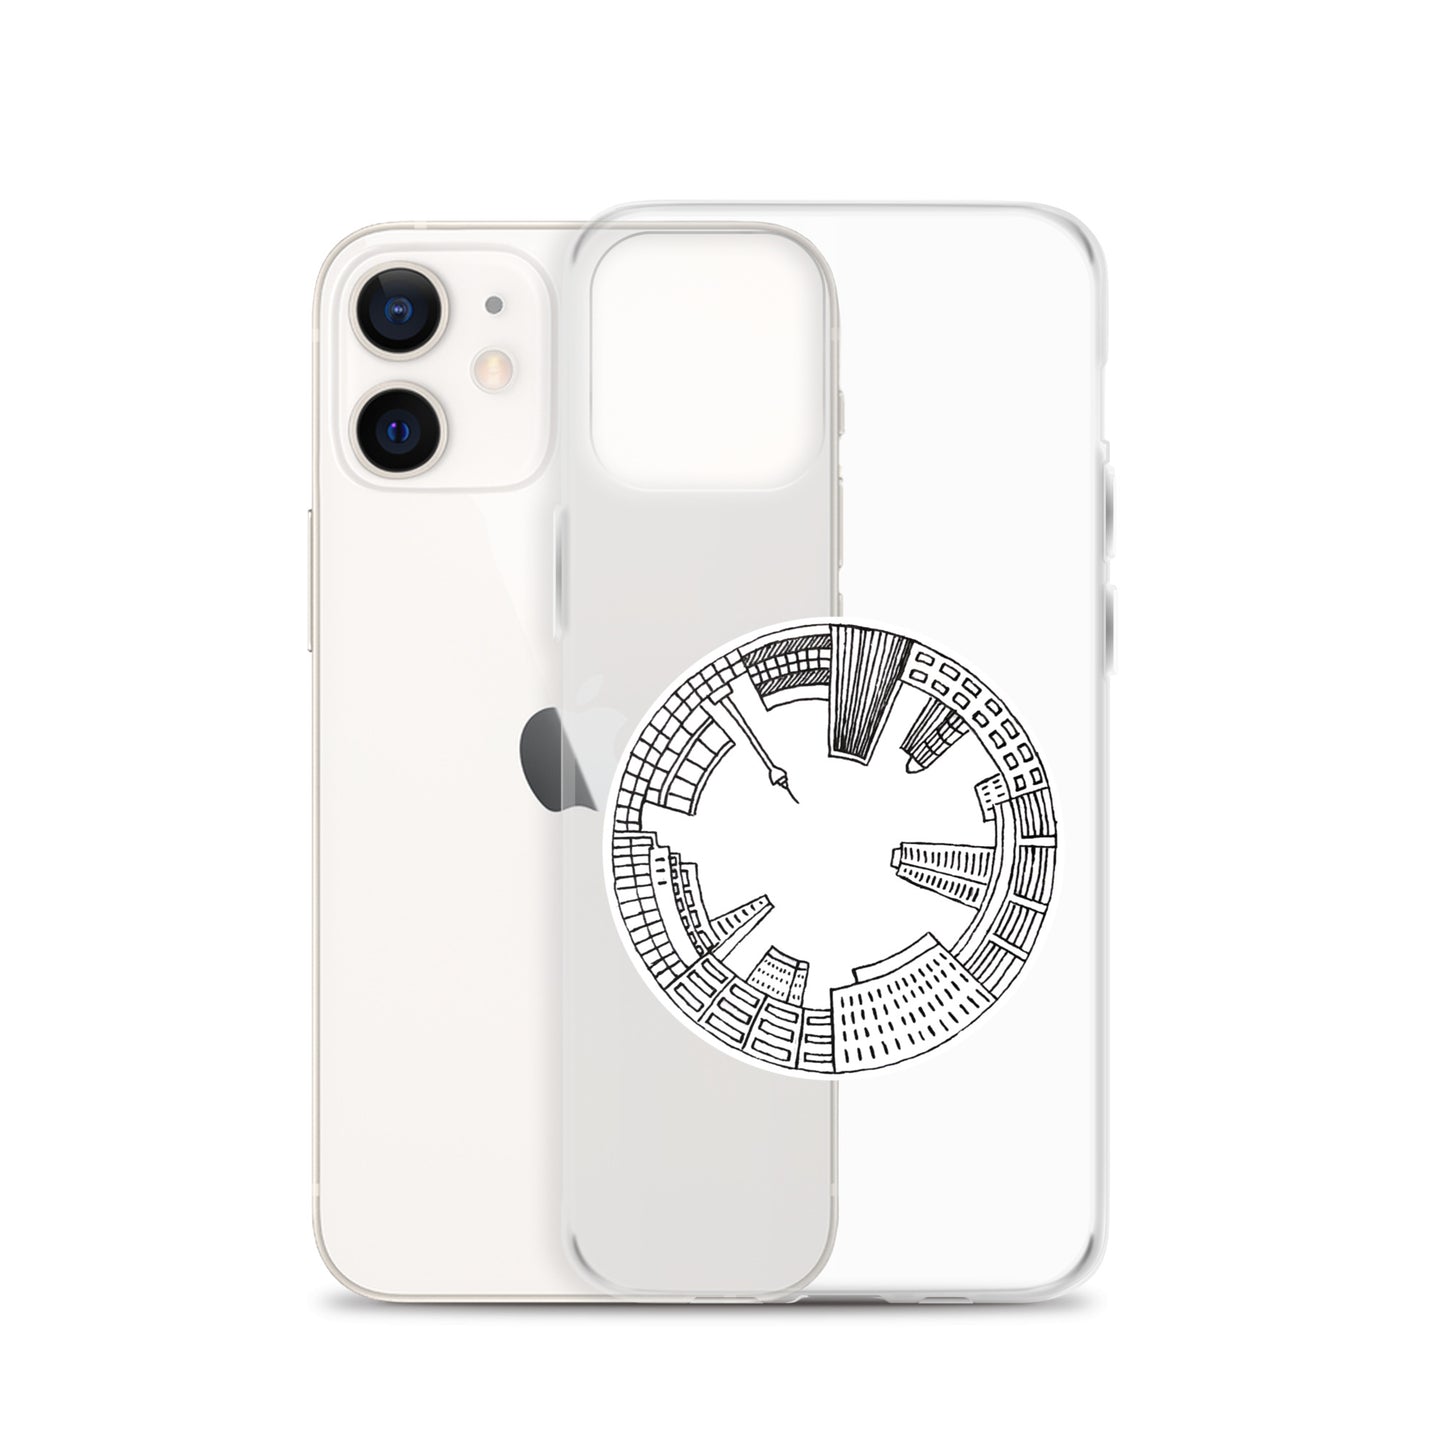 Business Major iPhone Case